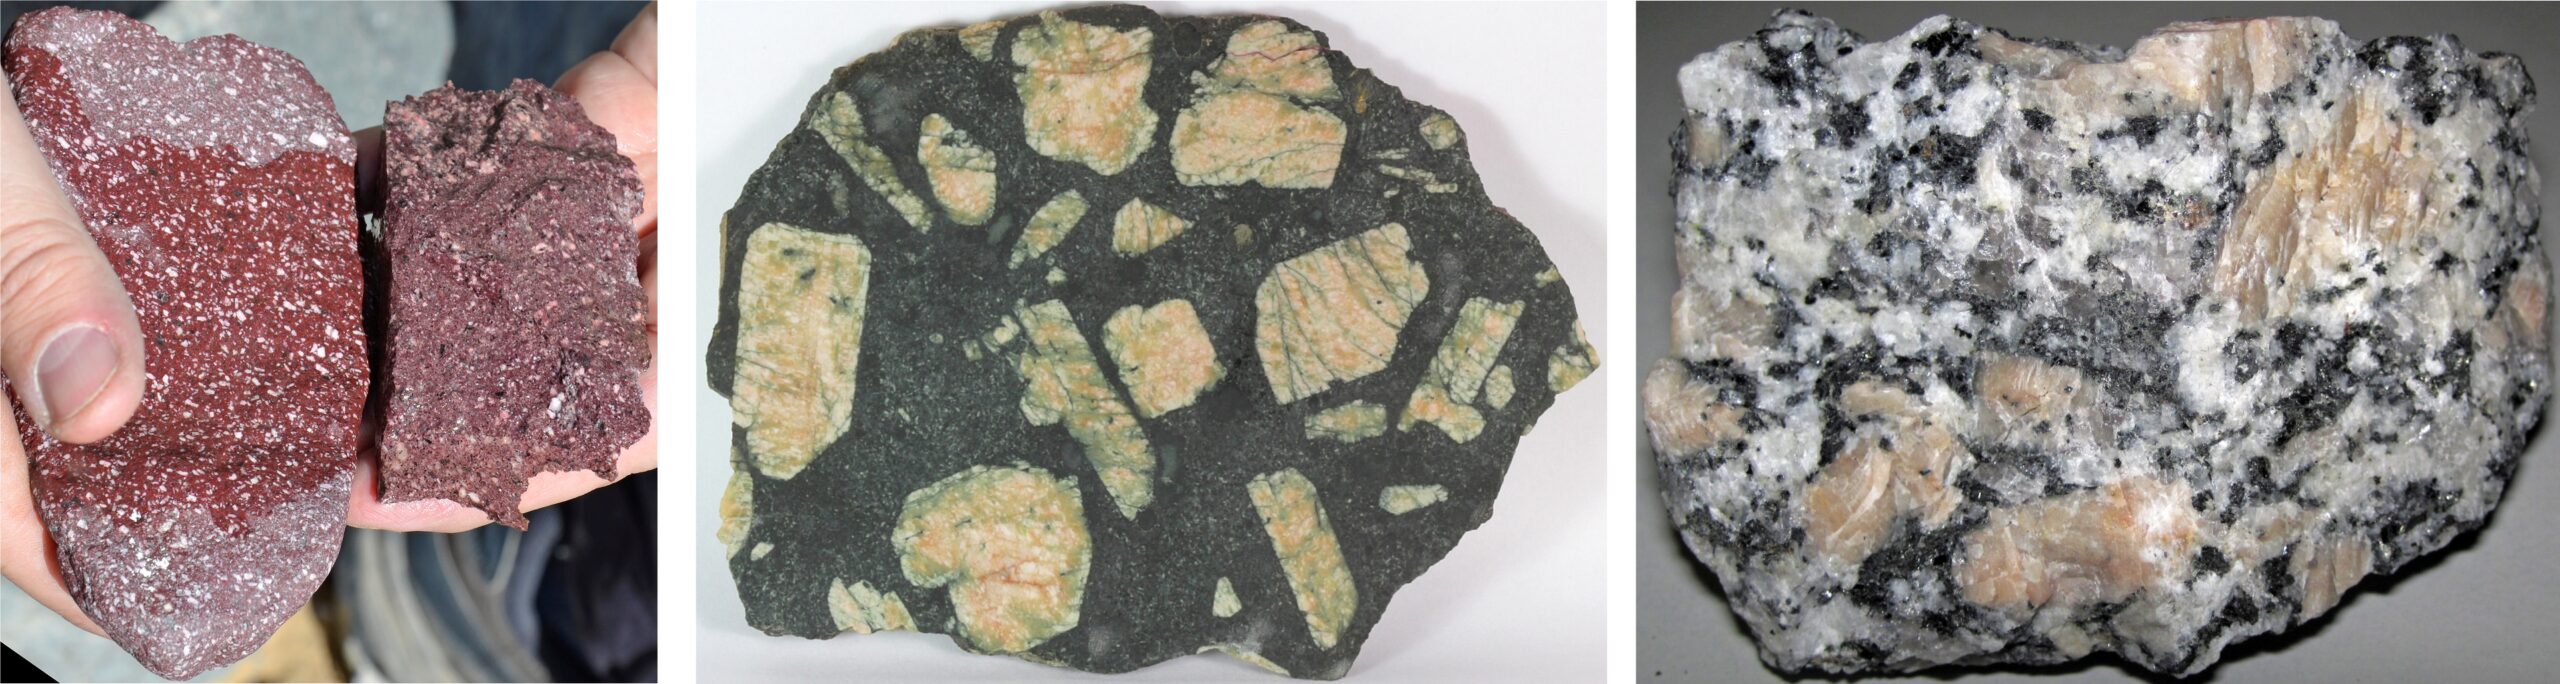 aphanitic andesite rock